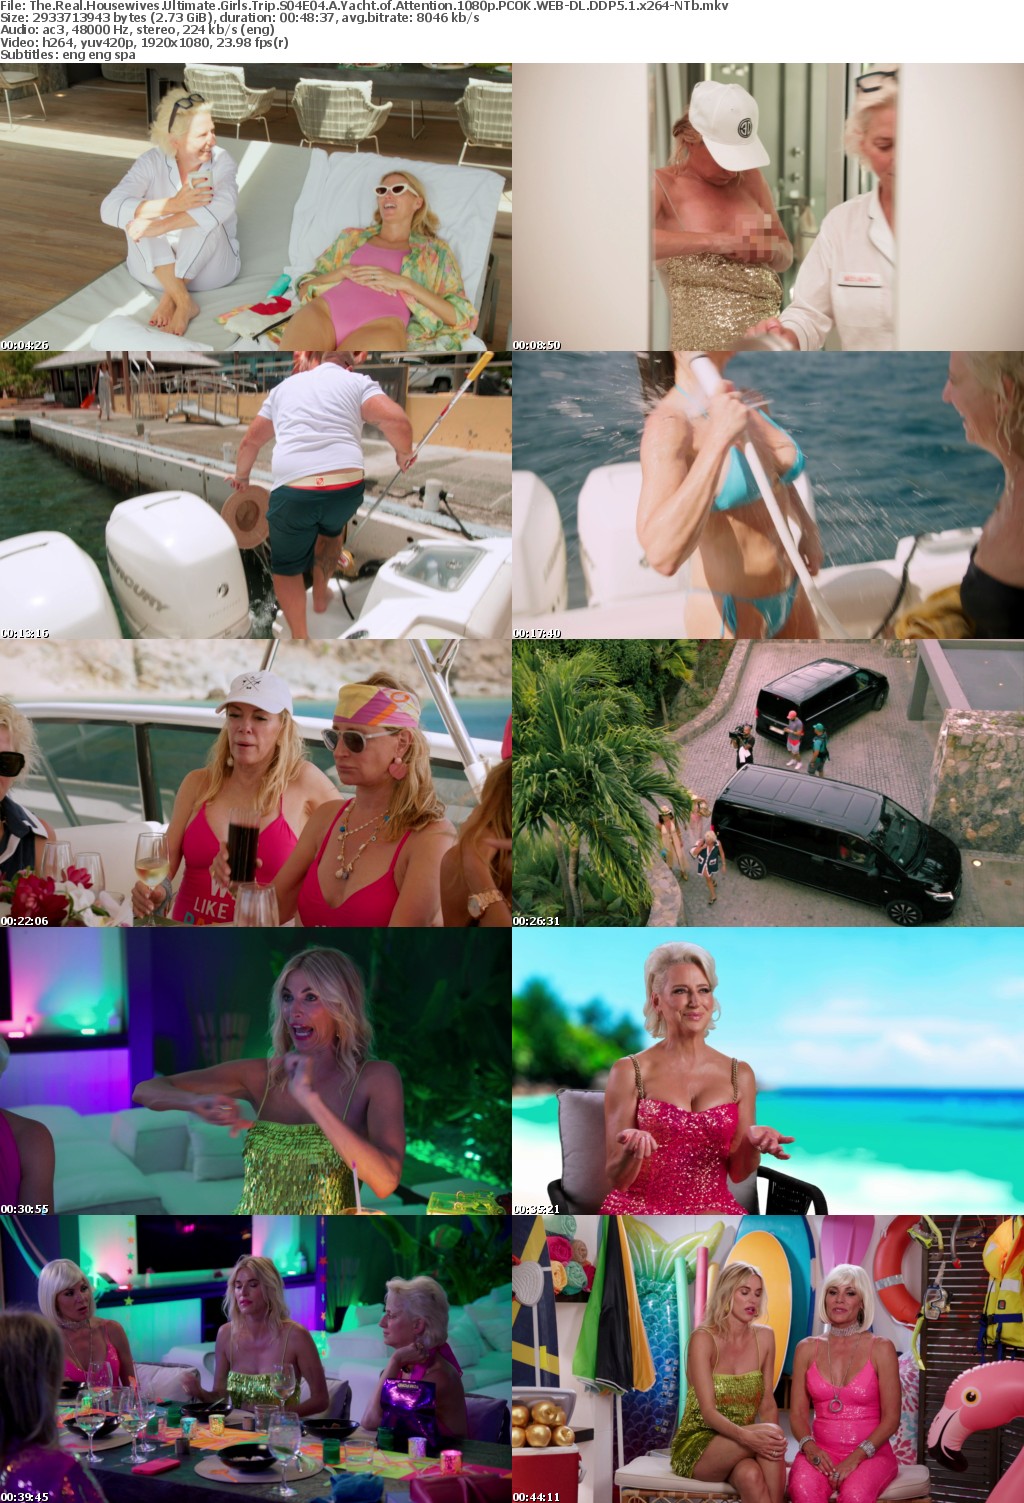 The Real Housewives Ultimate Girls Trip S04E04 A Yacht of Attention 1080p PCOK WEB-DL DDP5 1 x264-NTb